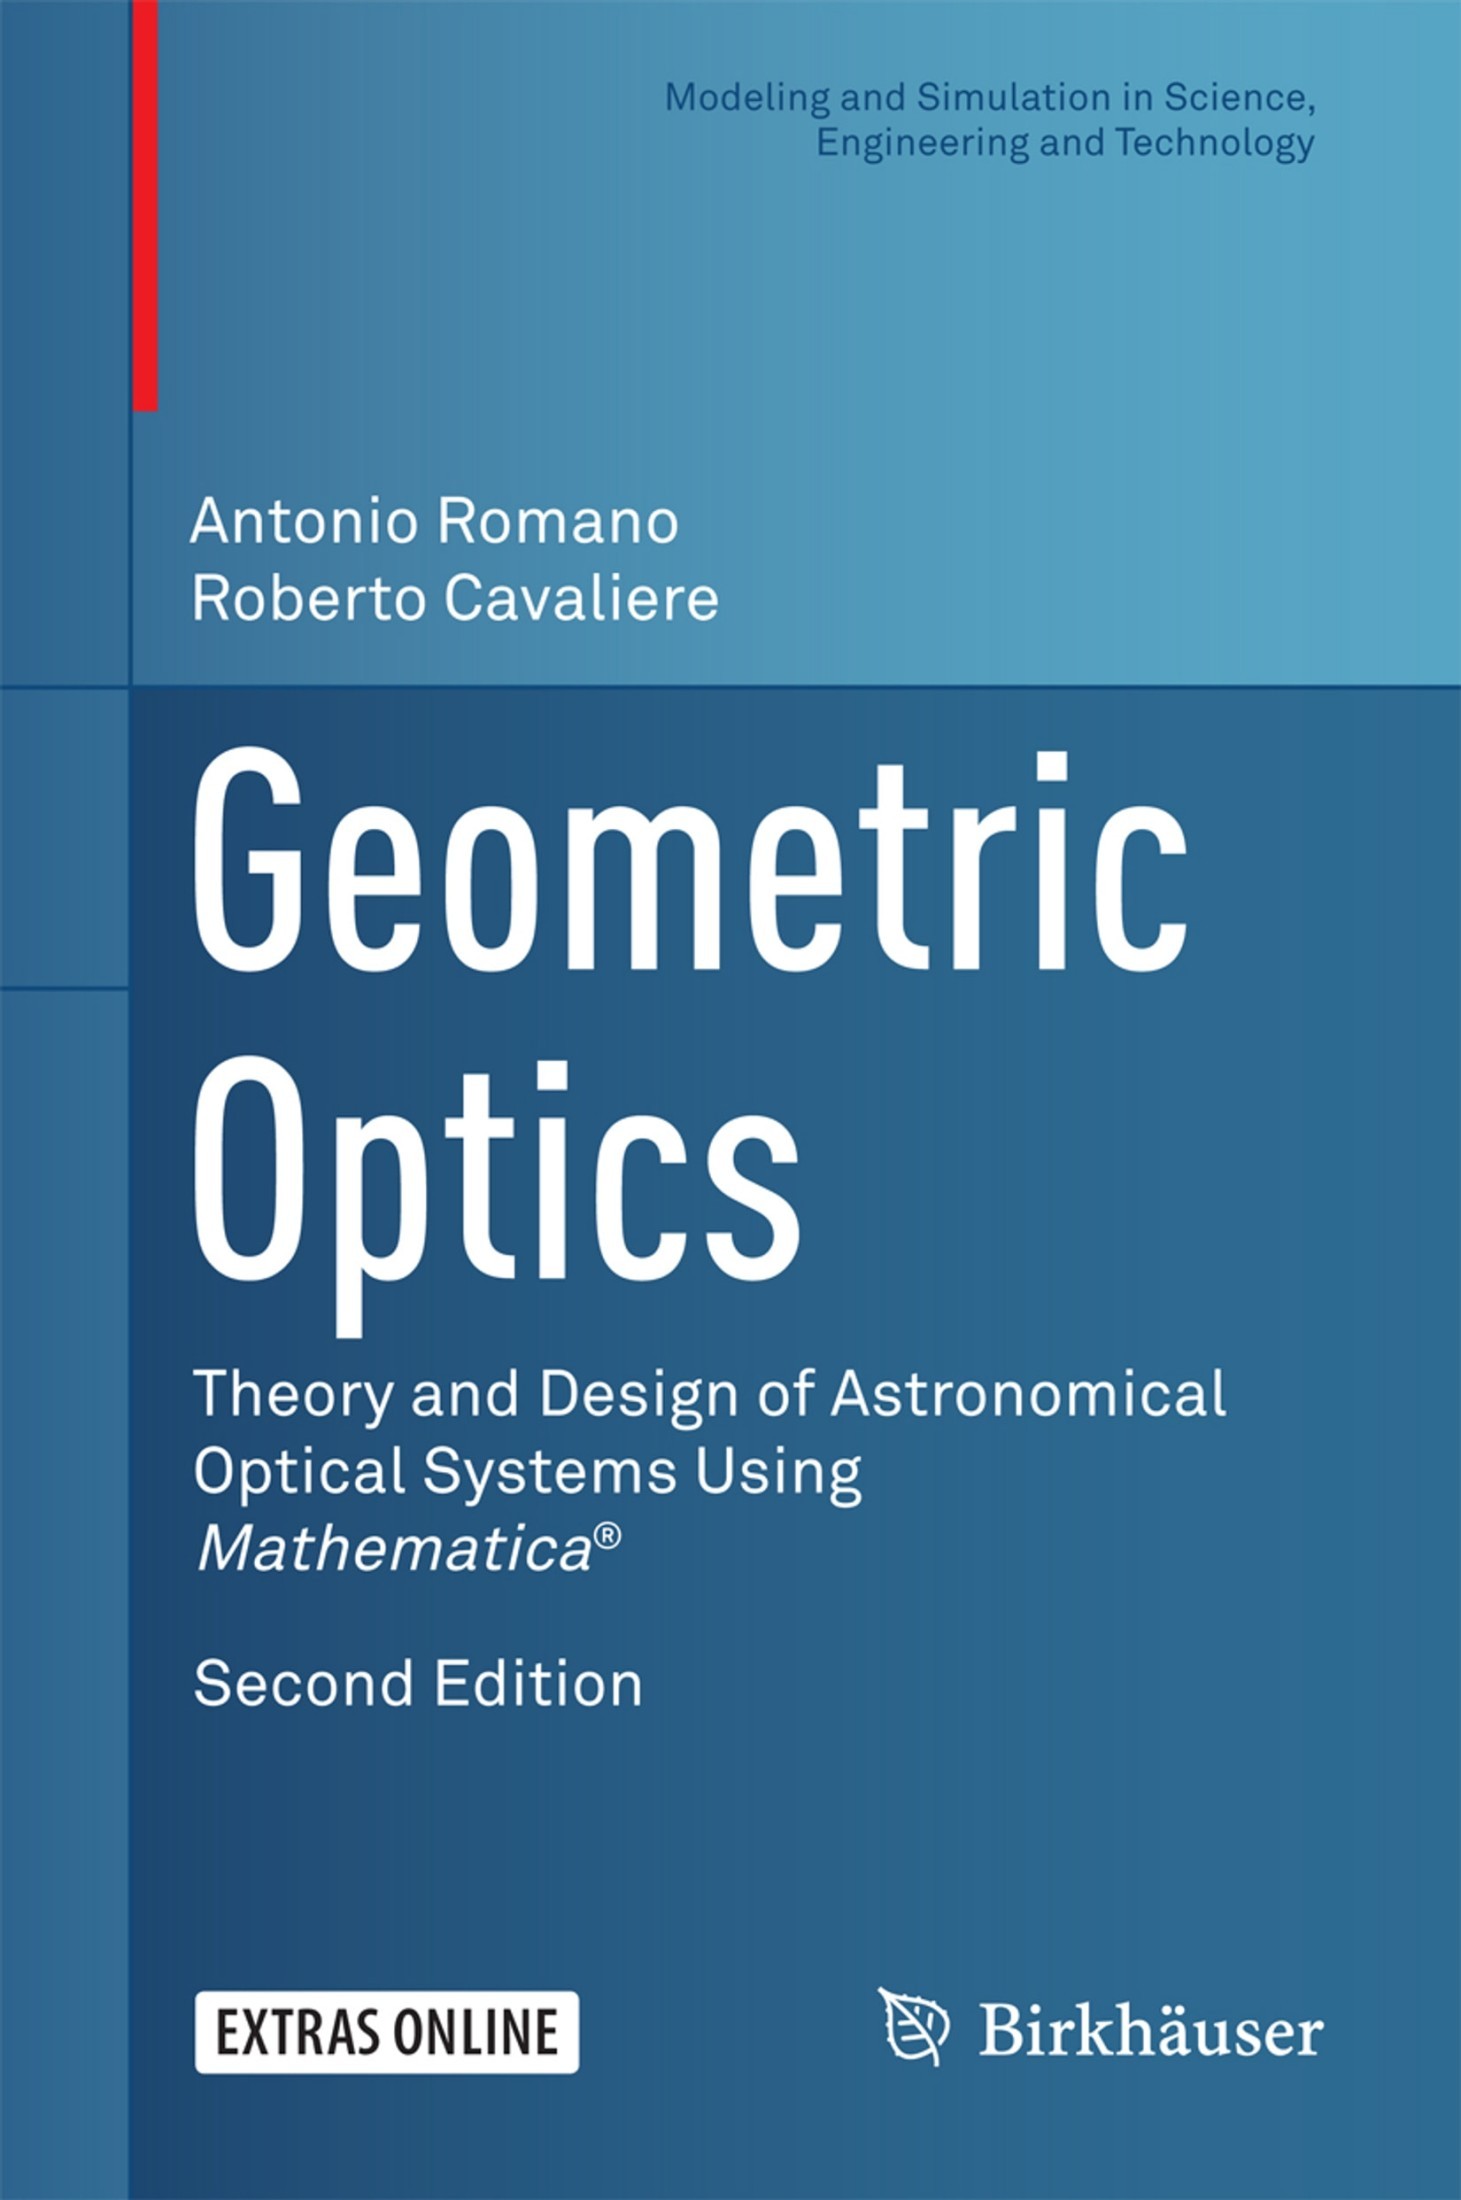 Geometric Optics: Theory and Design of Astronomical Optical Systems using Mathematica® (2022)